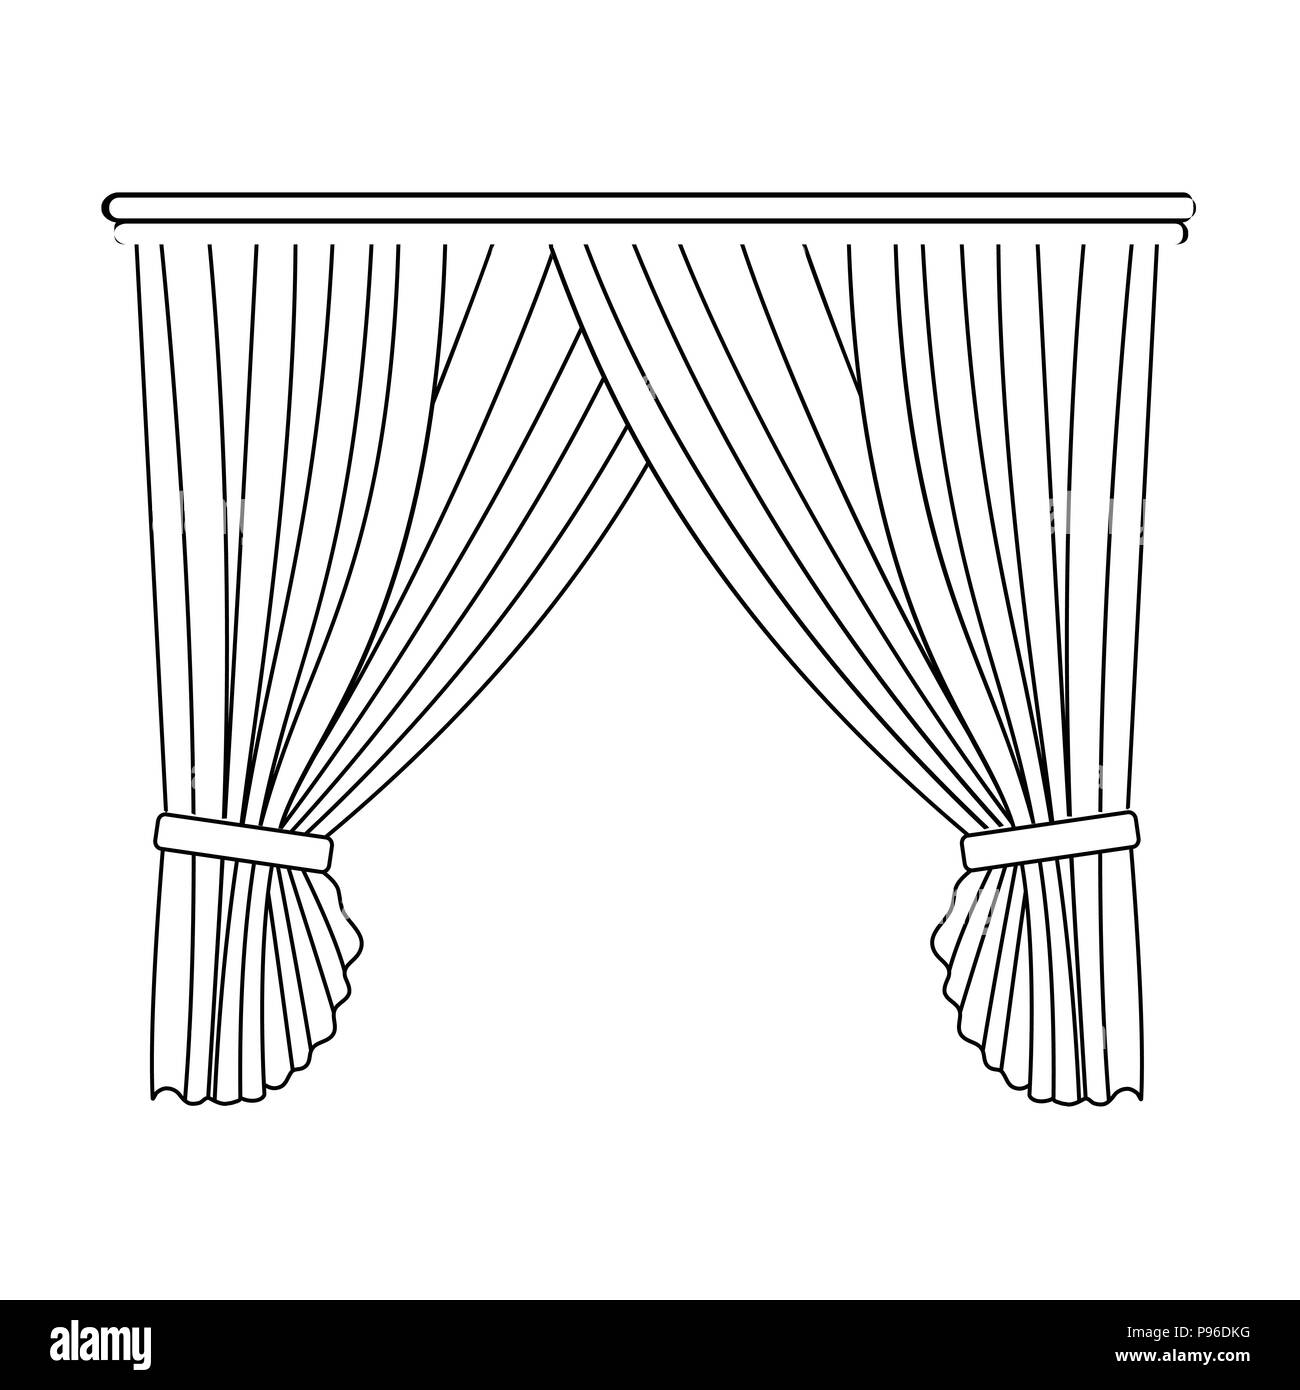 Draw The Curtains Stock Photos & Draw The Curtains Stock Images - Alamy